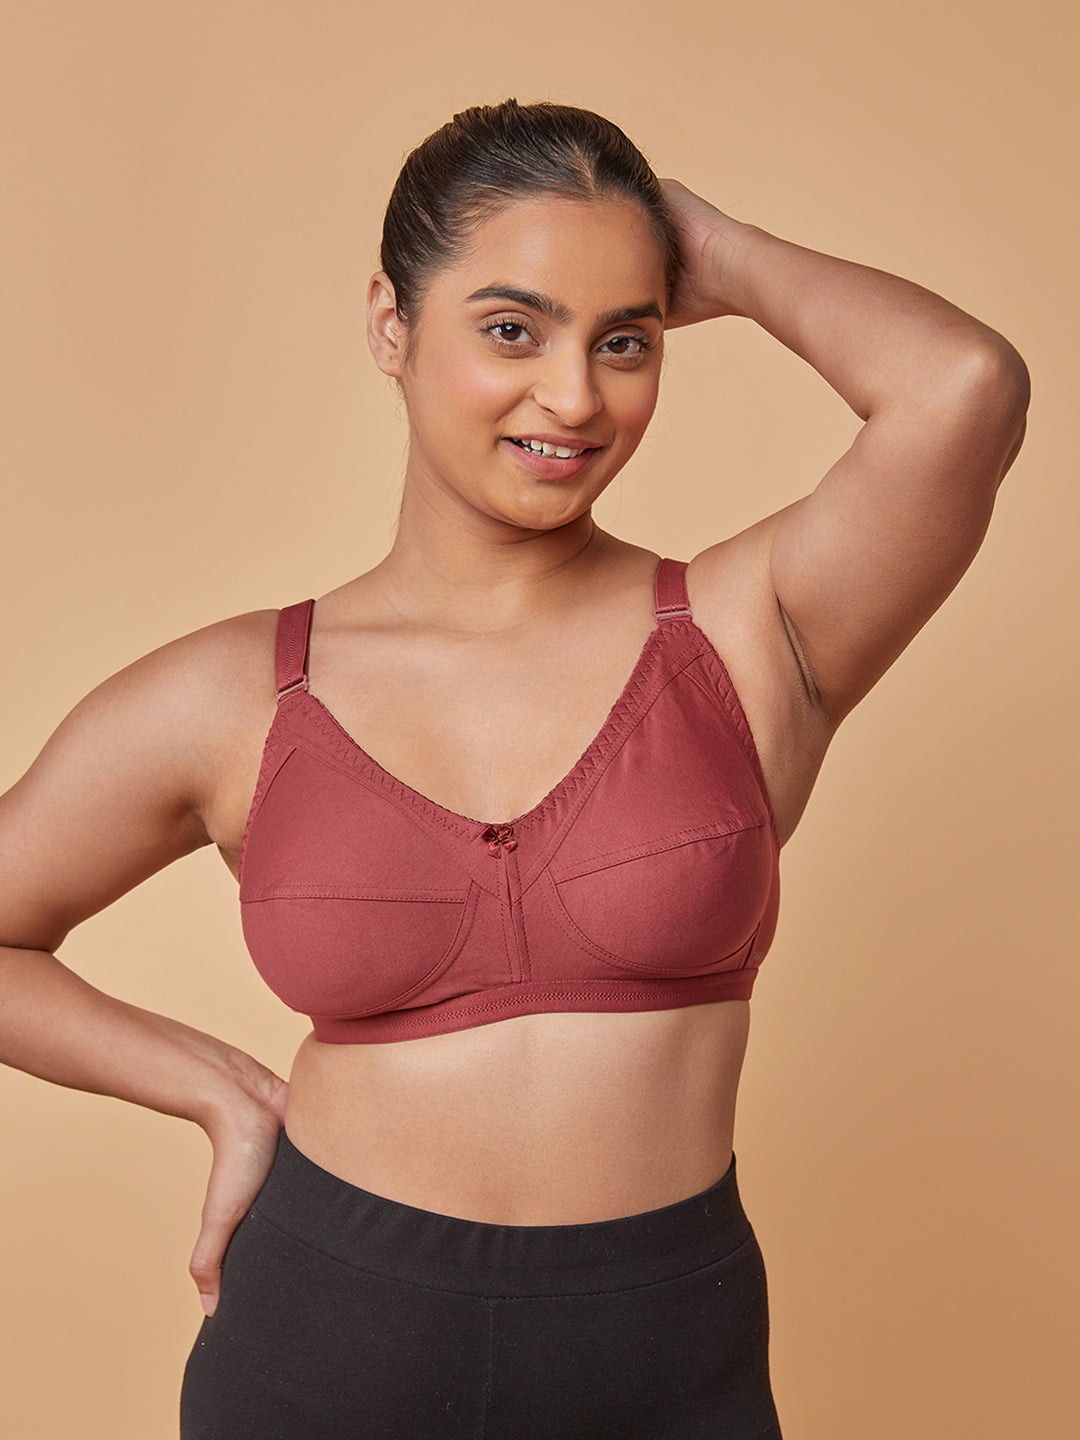 maashie M4408 Cotton Non-Padded Non-Wired Everyday Bra, Fawn 38C, Pack of  2 Women Full Coverage Non Padded Bra - Buy maashie M4408 Cotton Non-Padded  Non-Wired Everyday Bra, Fawn 38C